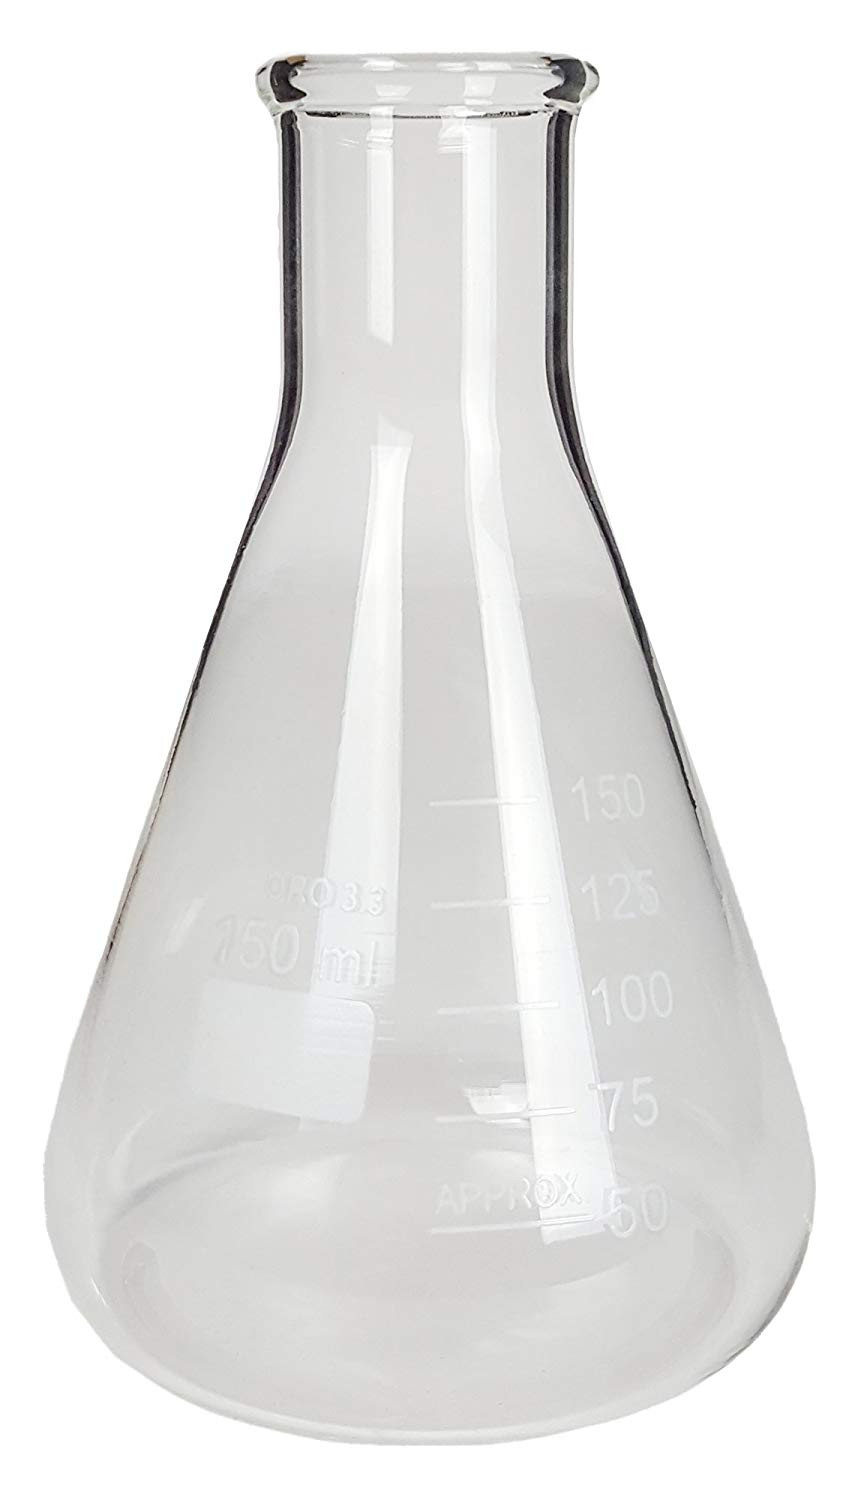 Narrow Neck Glass Vase Of Gsc International Ef150 Glass Gsc Erlenmeyer Flask 150 Ml with with Gsc International Ef150 Glass Gsc Erlenmeyer Flask 150 Ml with Graduations Borosilicate Glass 5 0721 Fl Oz Capacity Amazon Com Industrial